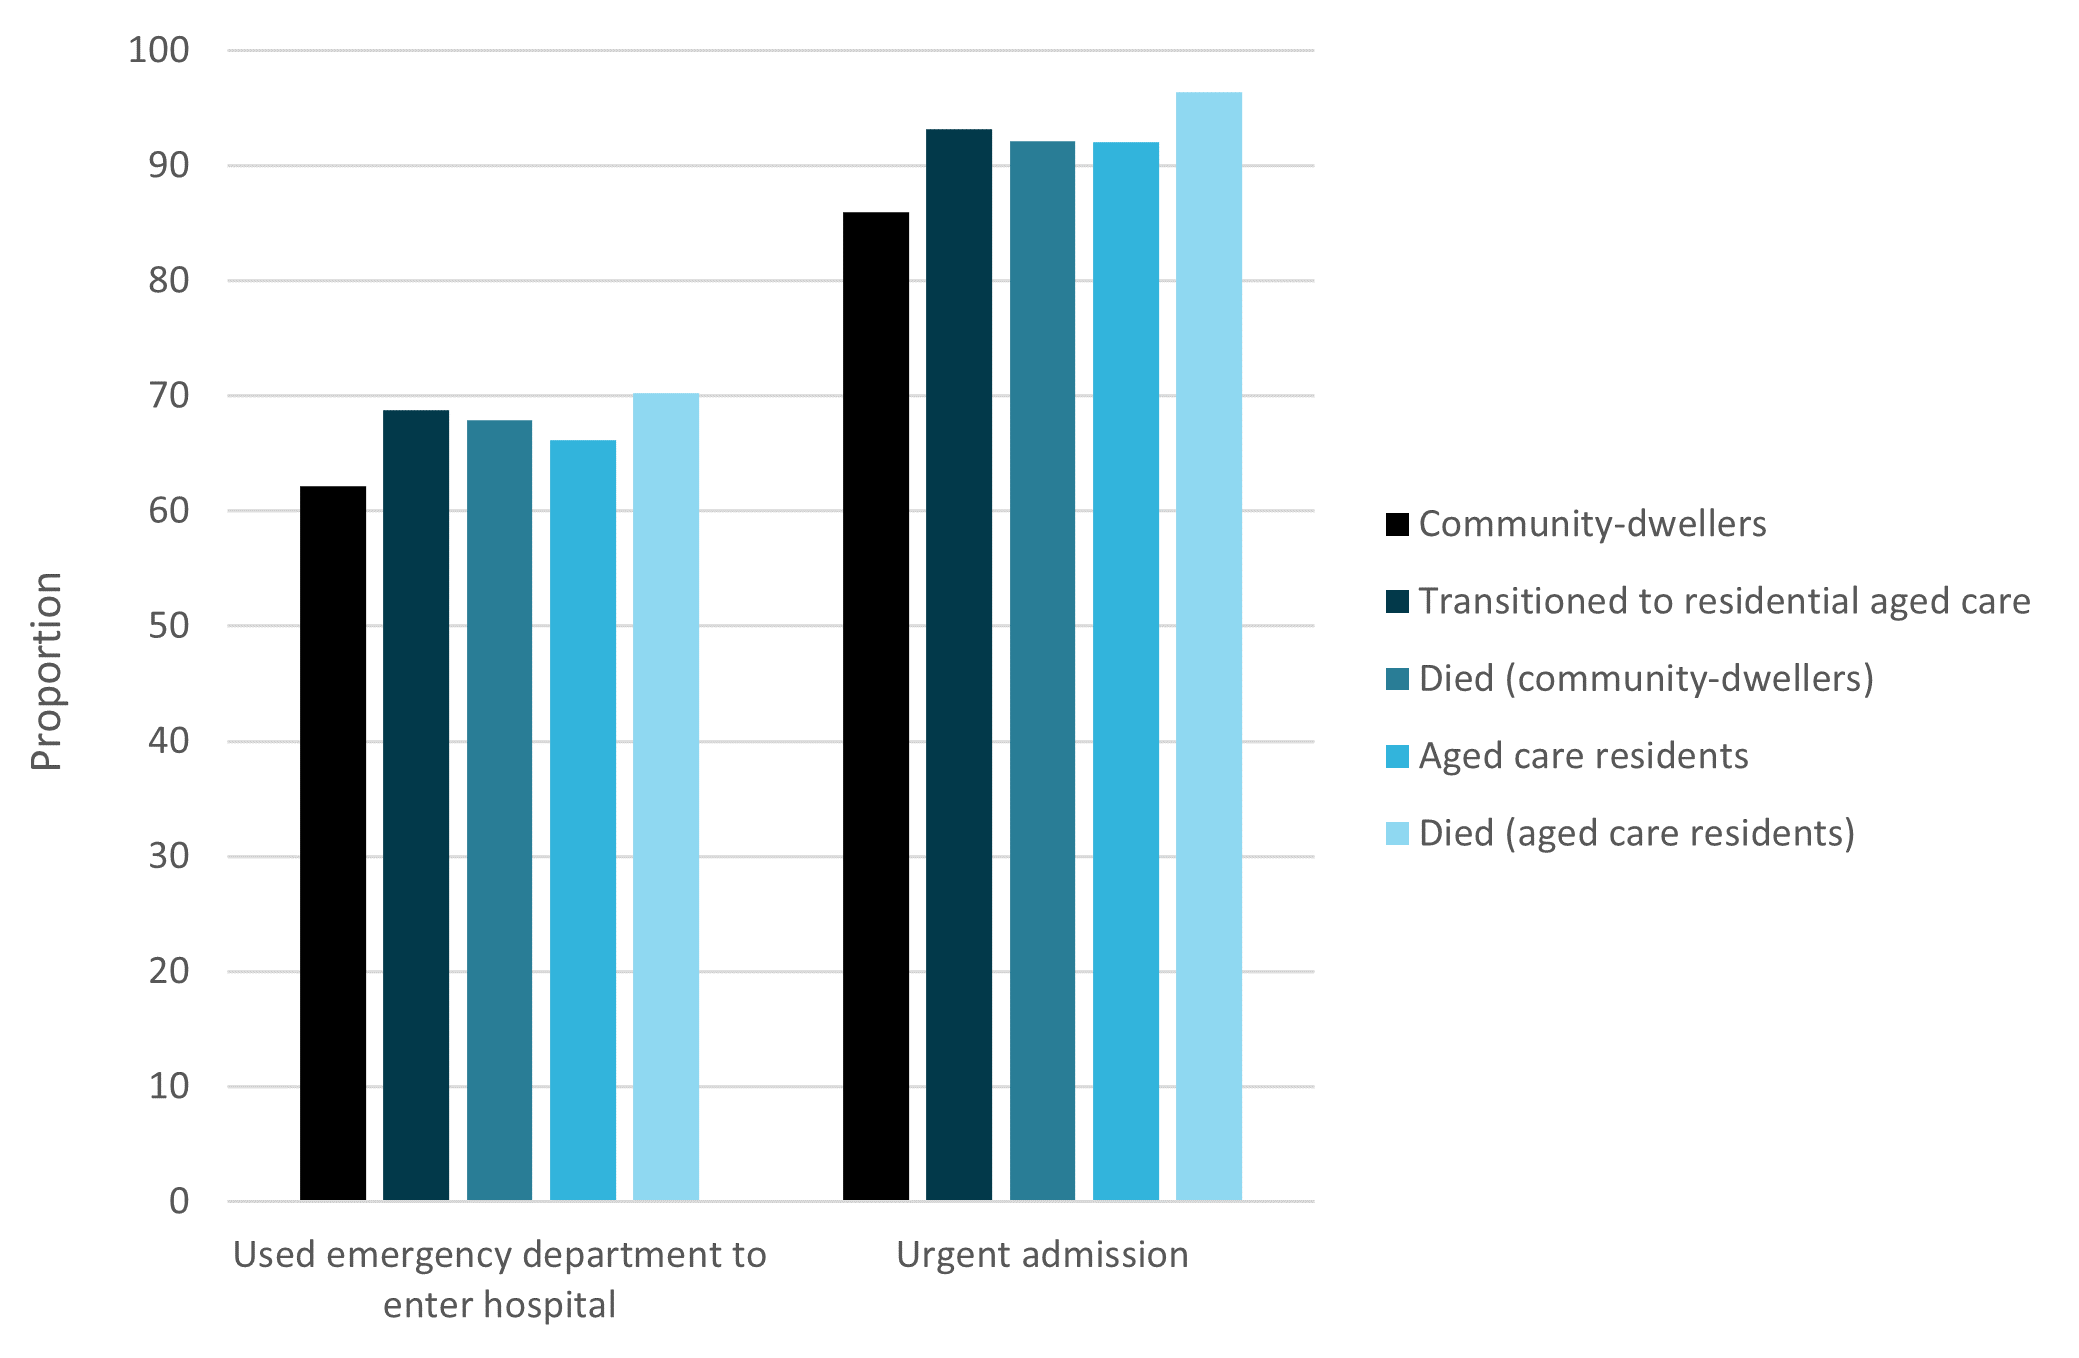 The figure is a bar chart and shows that community-dwellers were slightly less likely to use the emergency department to enter hospital or to have an urgent admission compared to aged care residents, people who transitioned to residential aged care, and people who died during their hospitalisation or within 7-days of discharge.